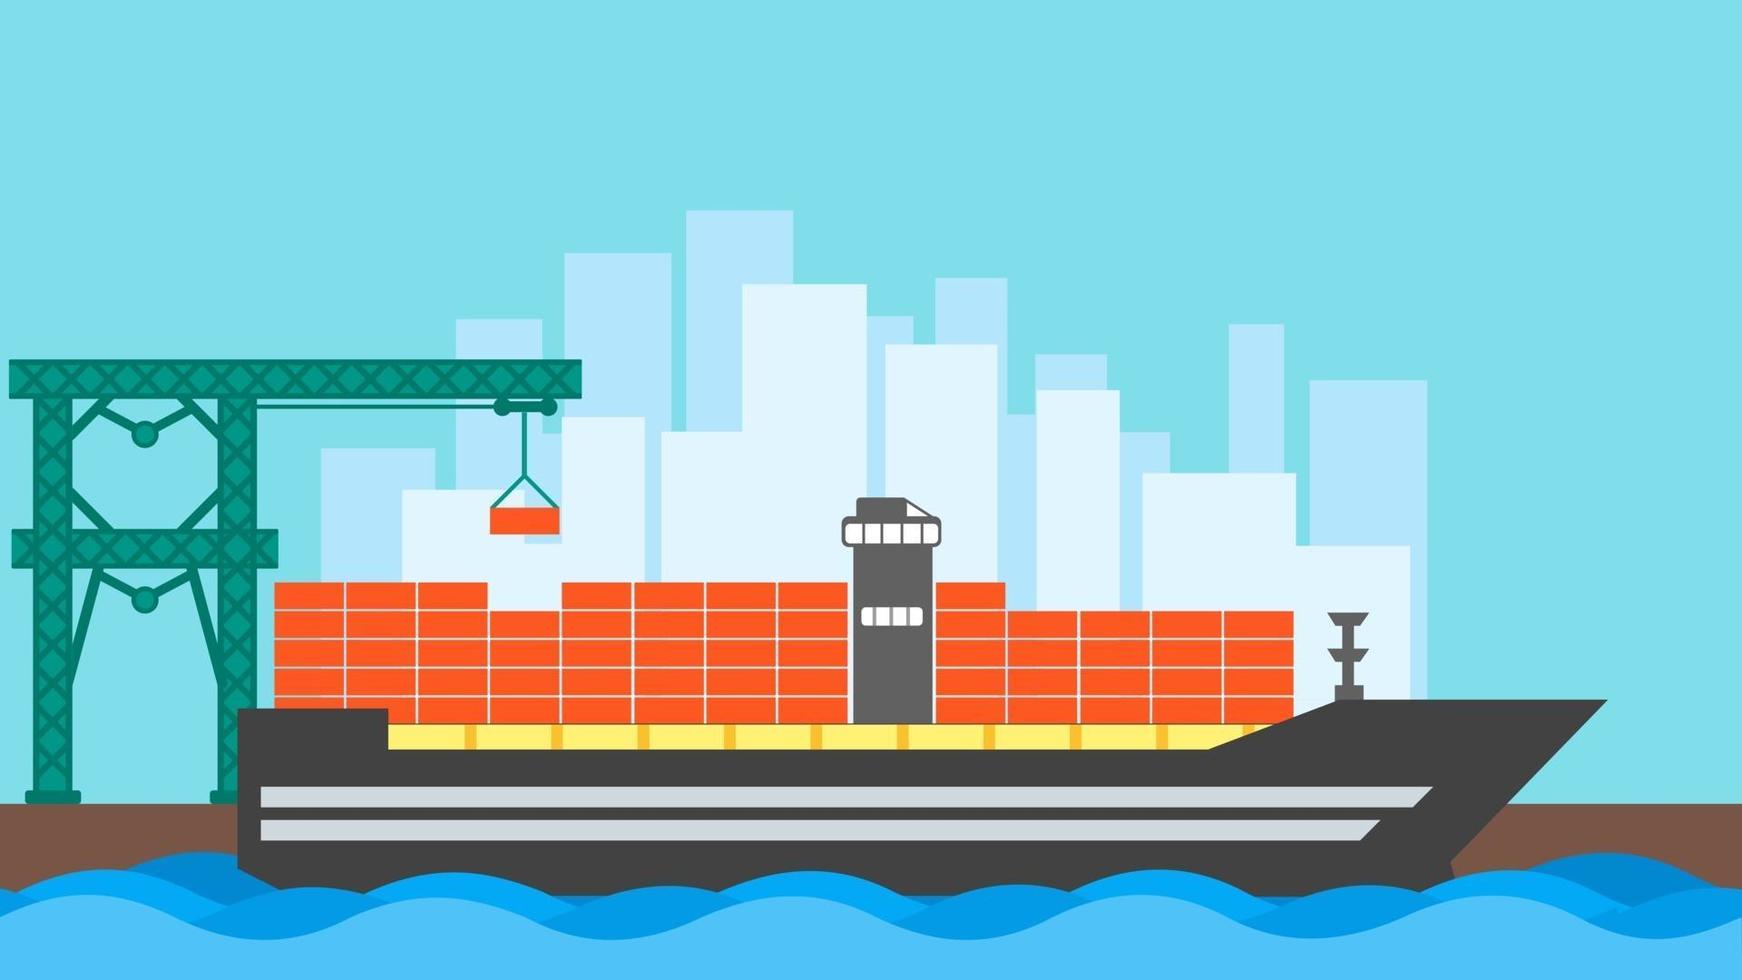 Cargo ship container. Sea ocean transportation logistic. Maritime shipping freight transportation delivery. Warehouse port logistic. flat style vector illustration.